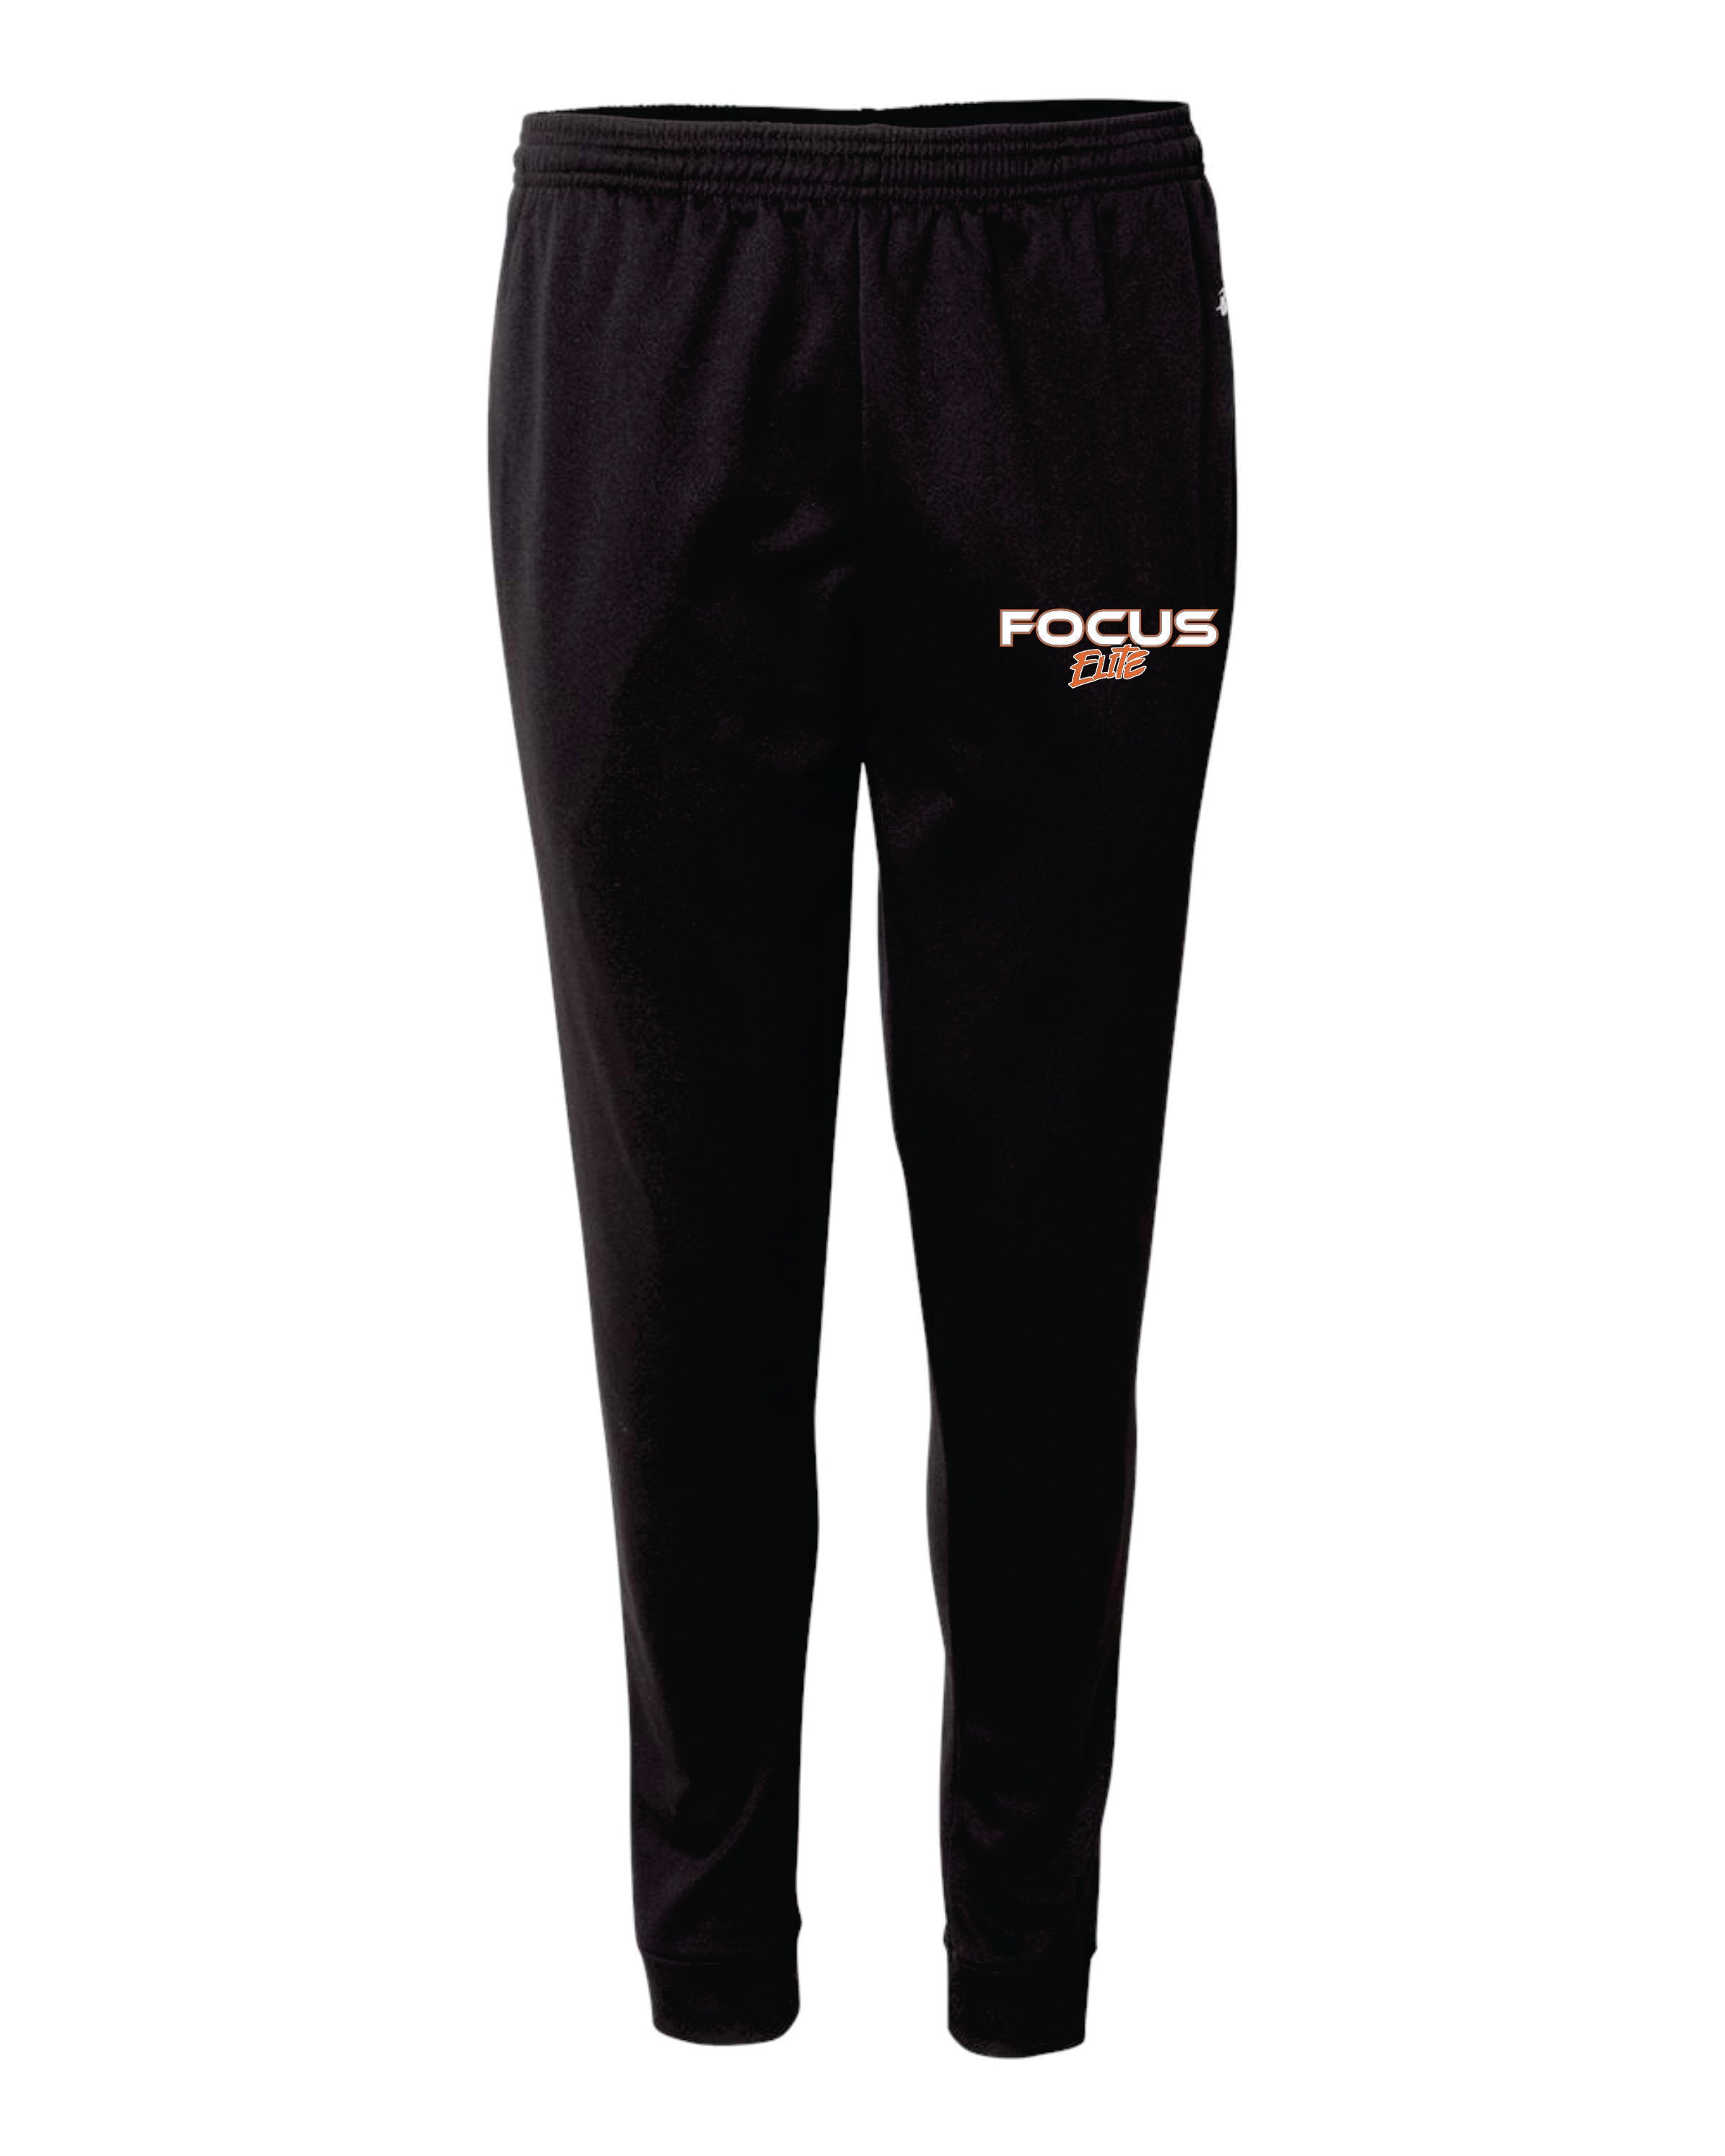 Focus Joggers by Badger - Adult